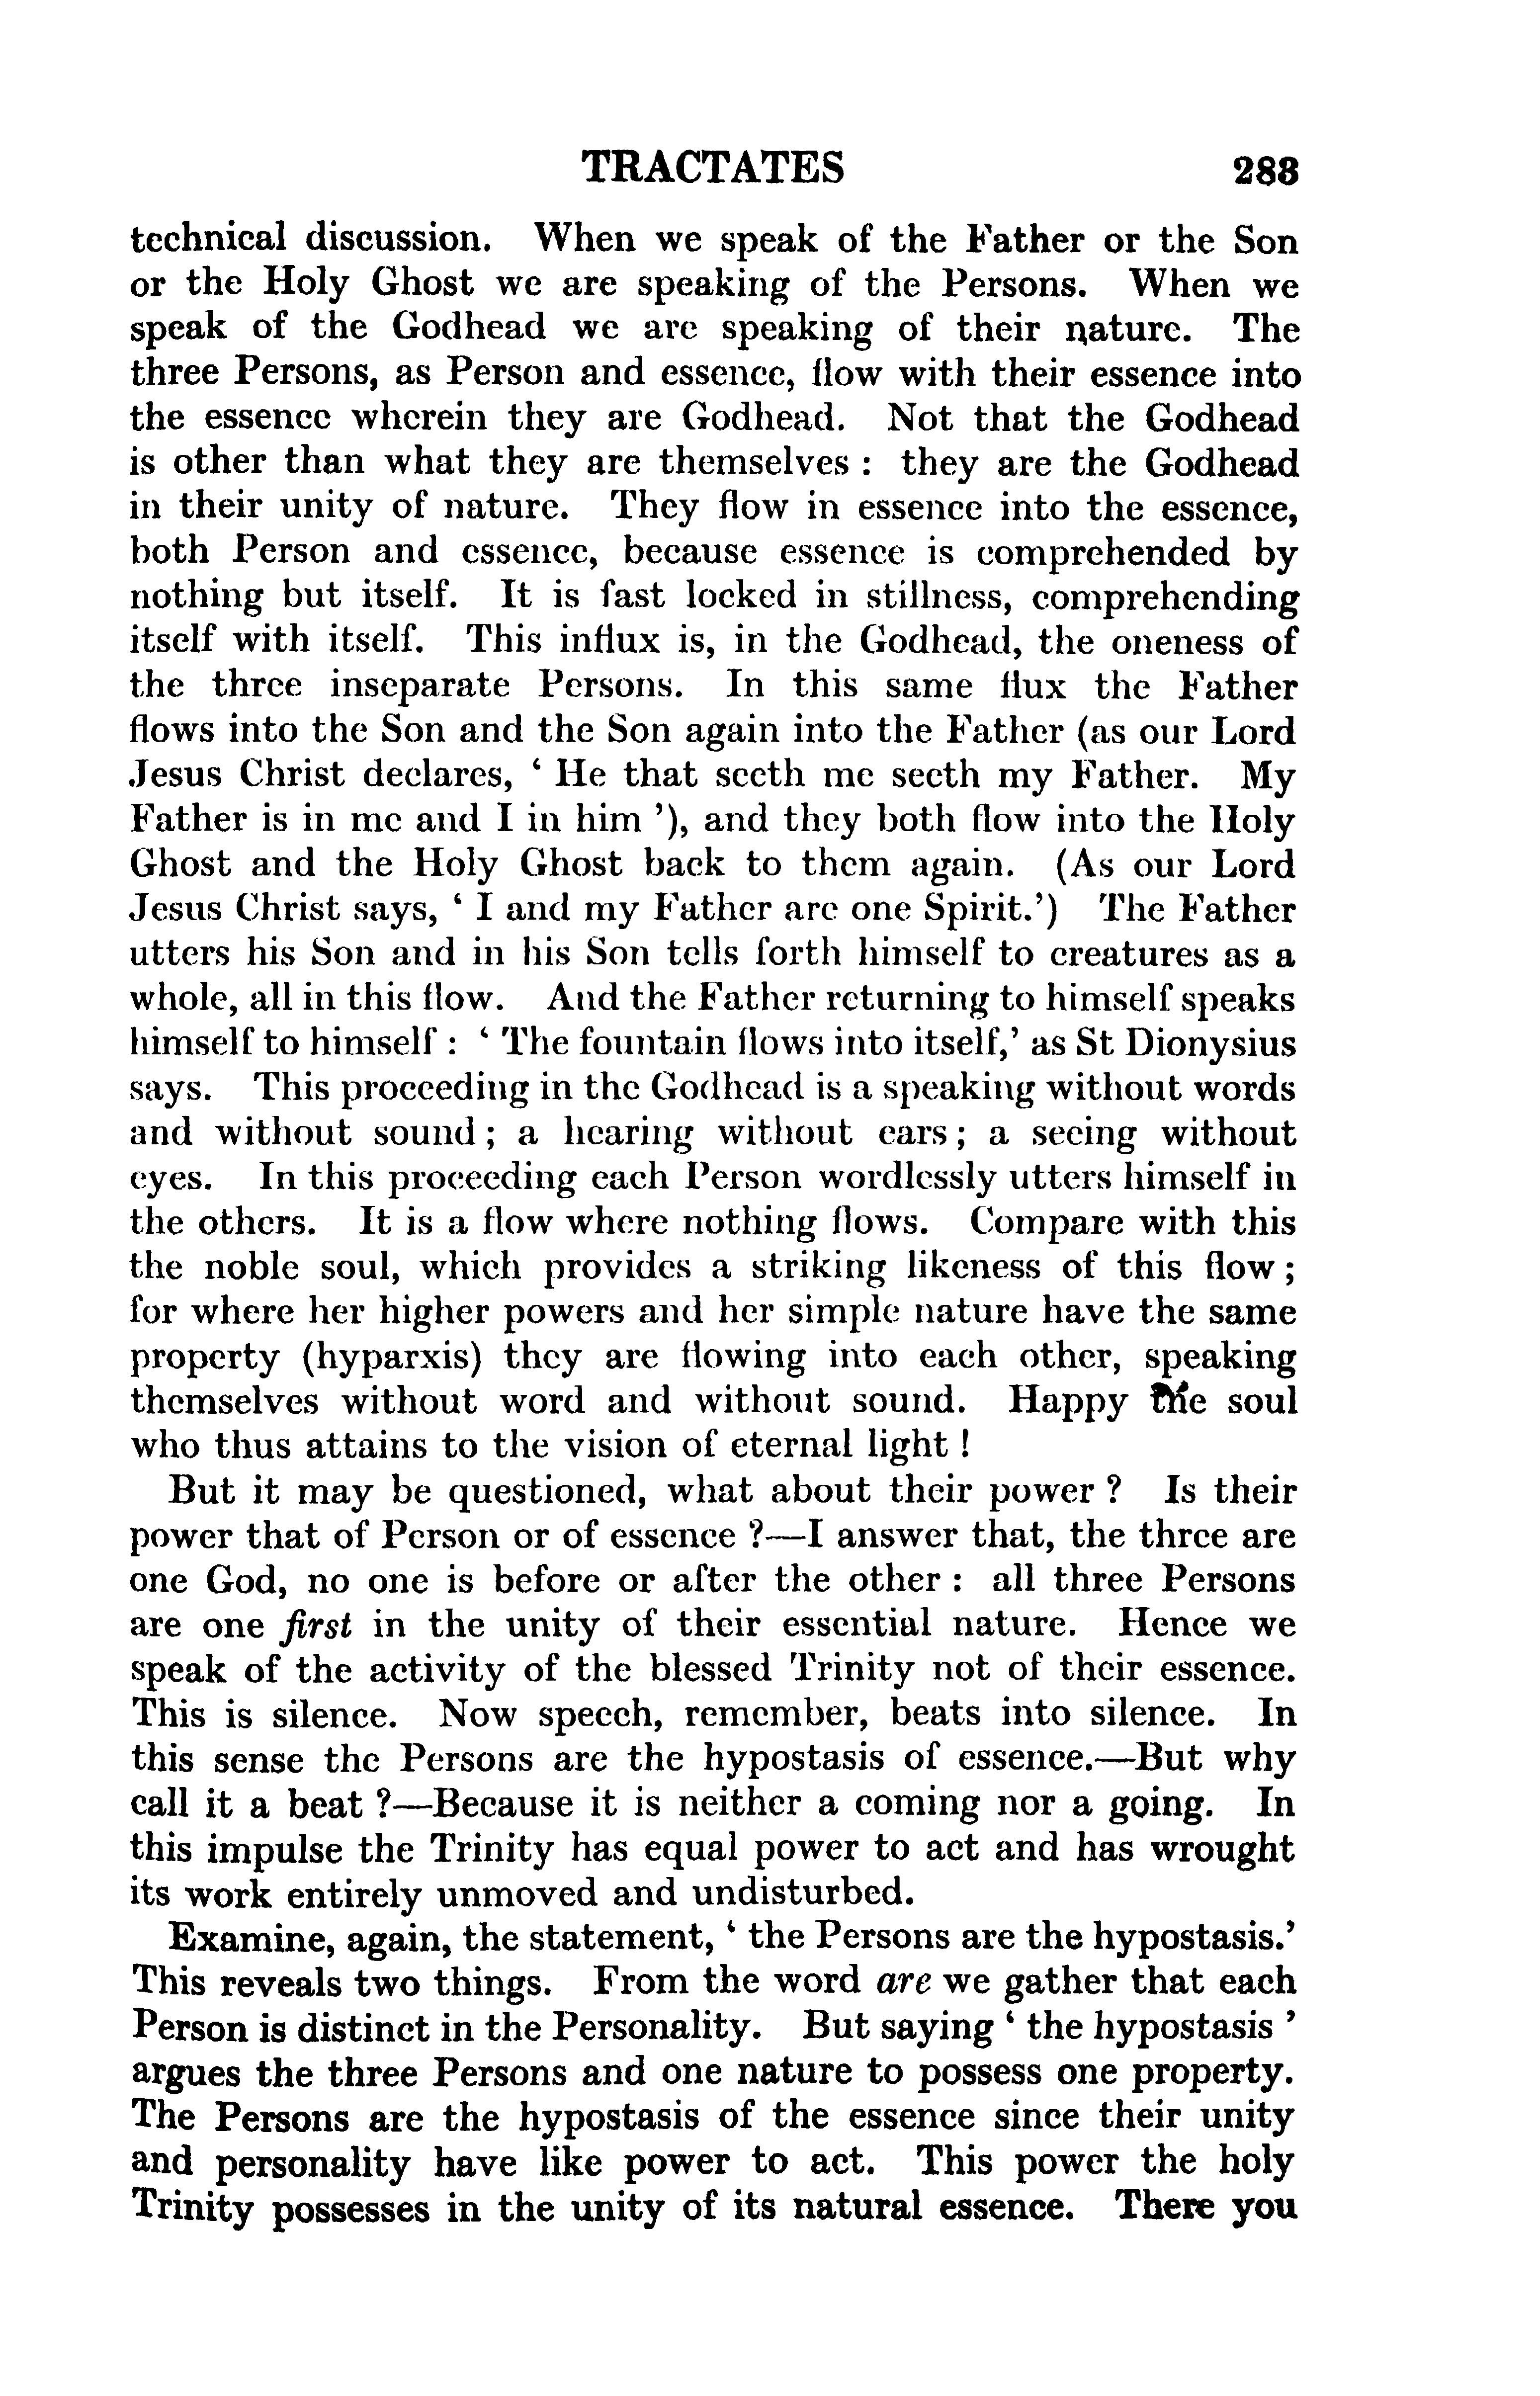 Image of page 0307